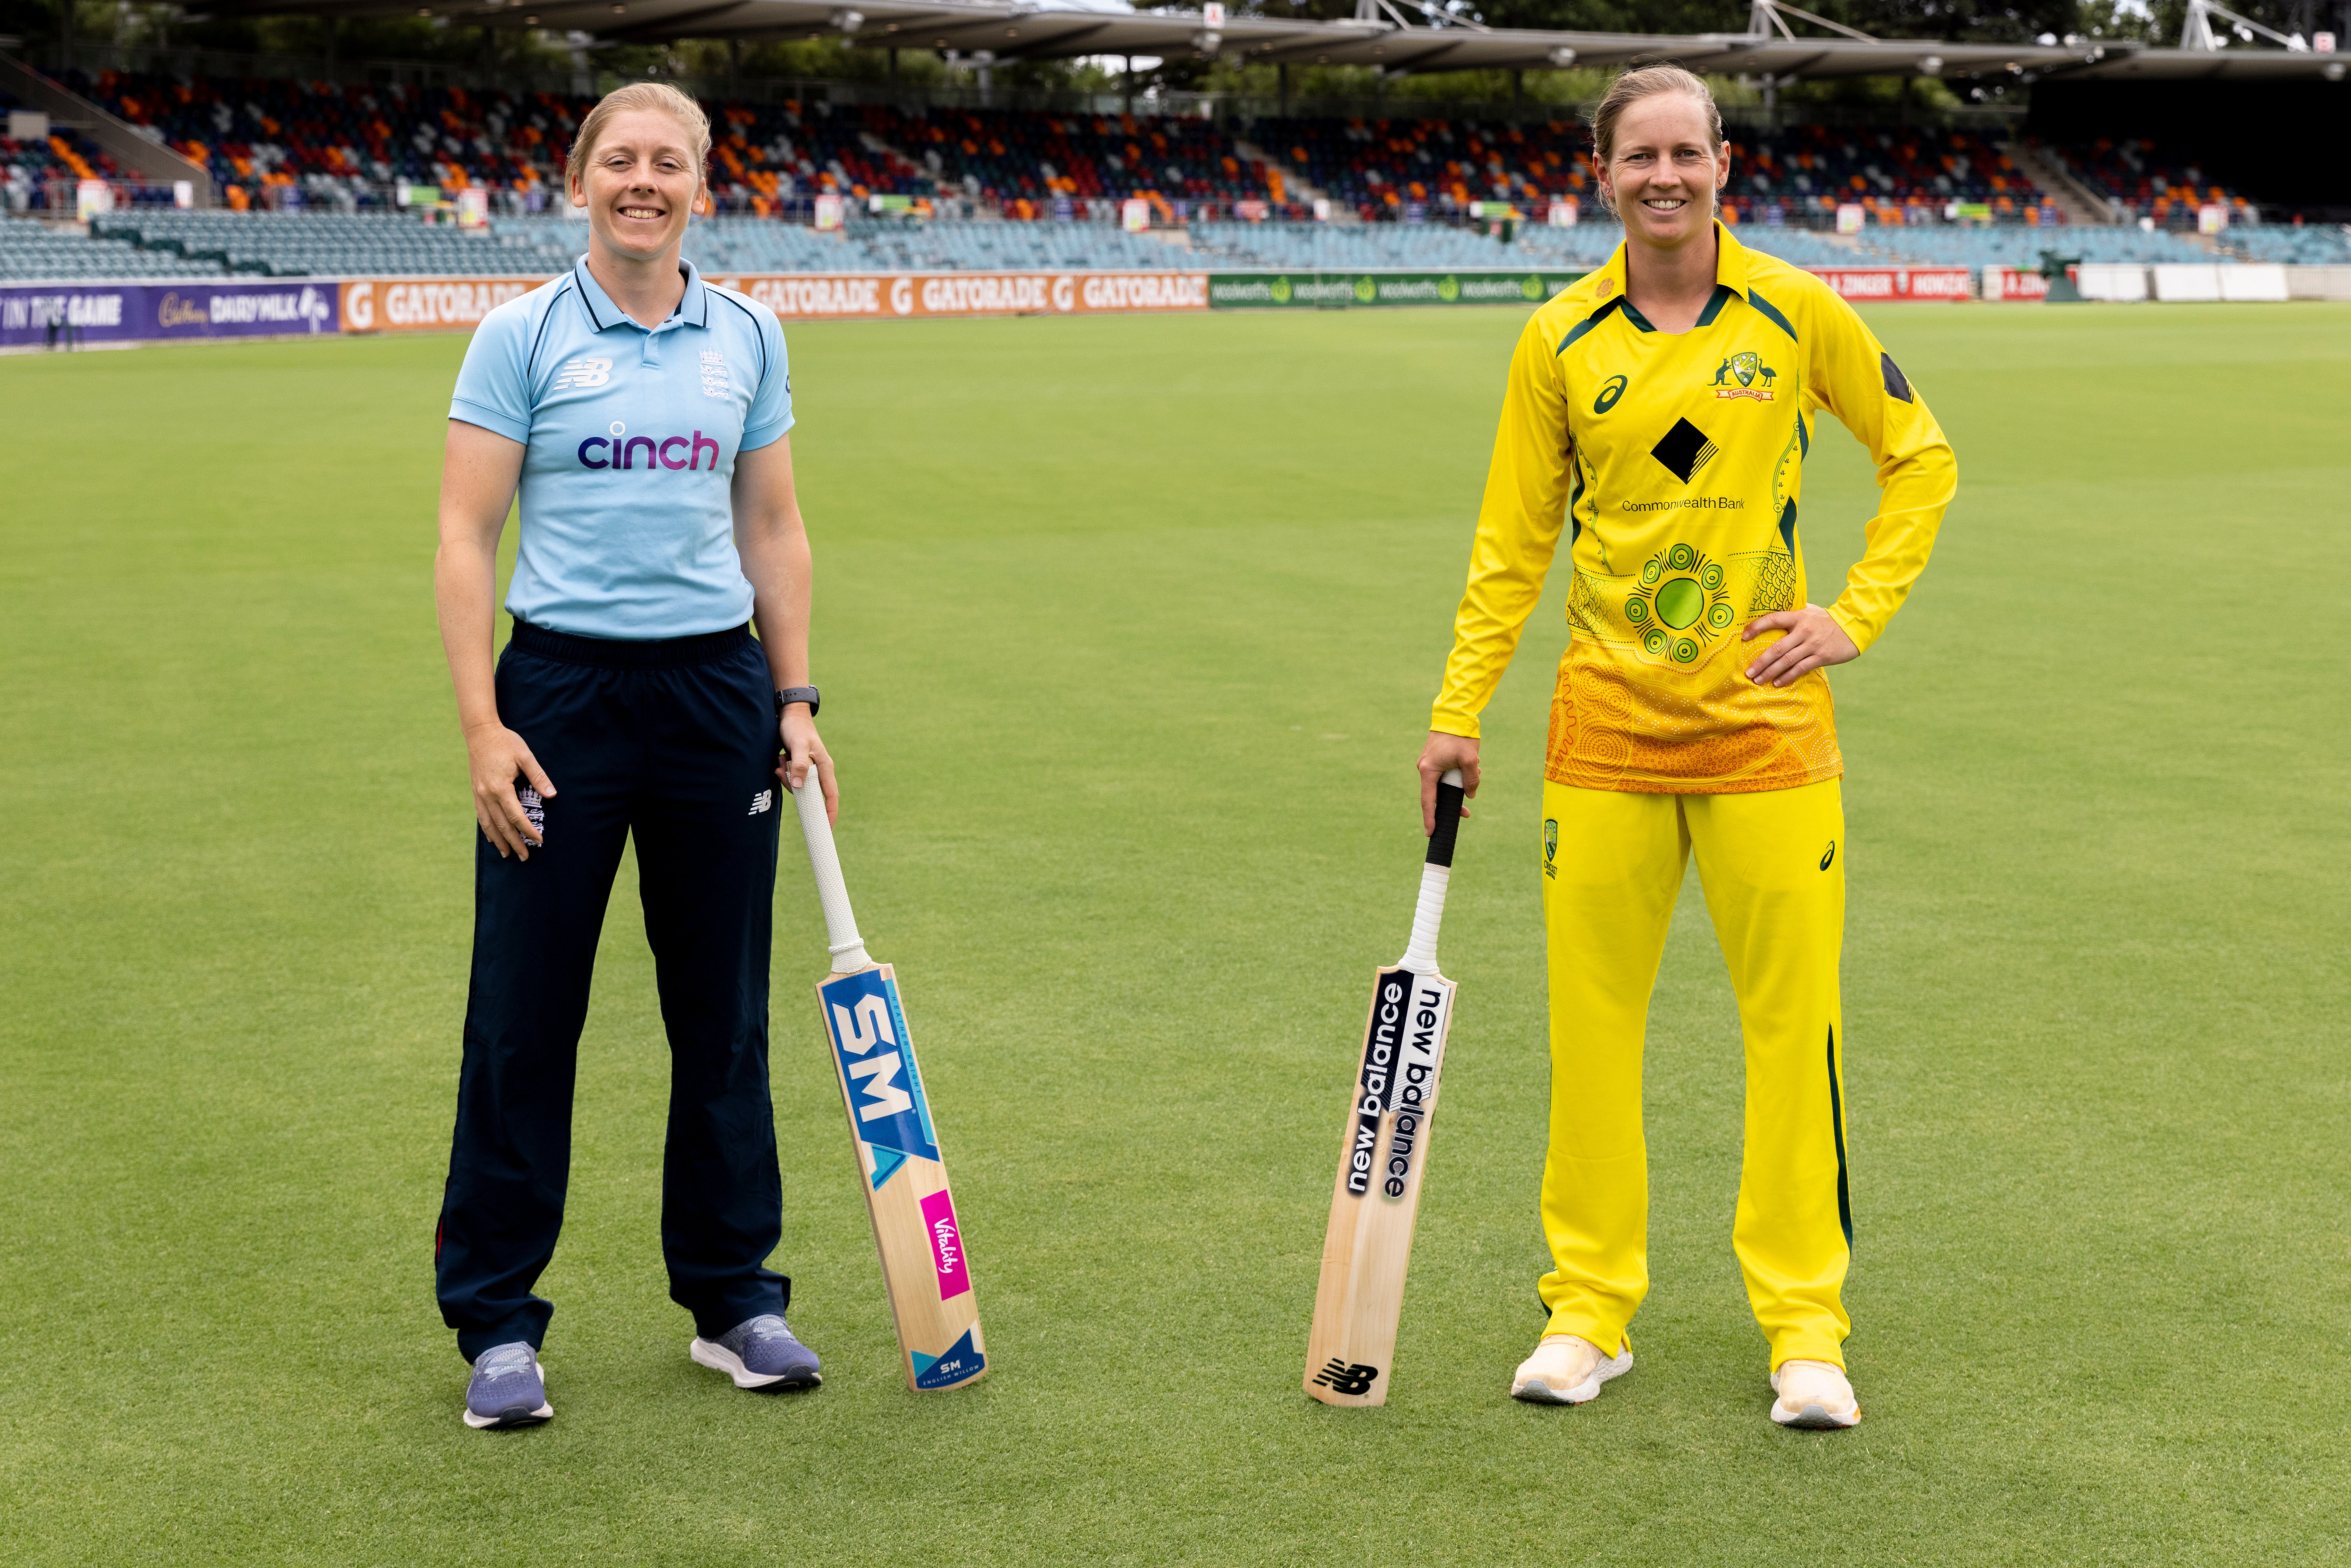 Engand will take on Australia in the women’s Ashes starting 22 June